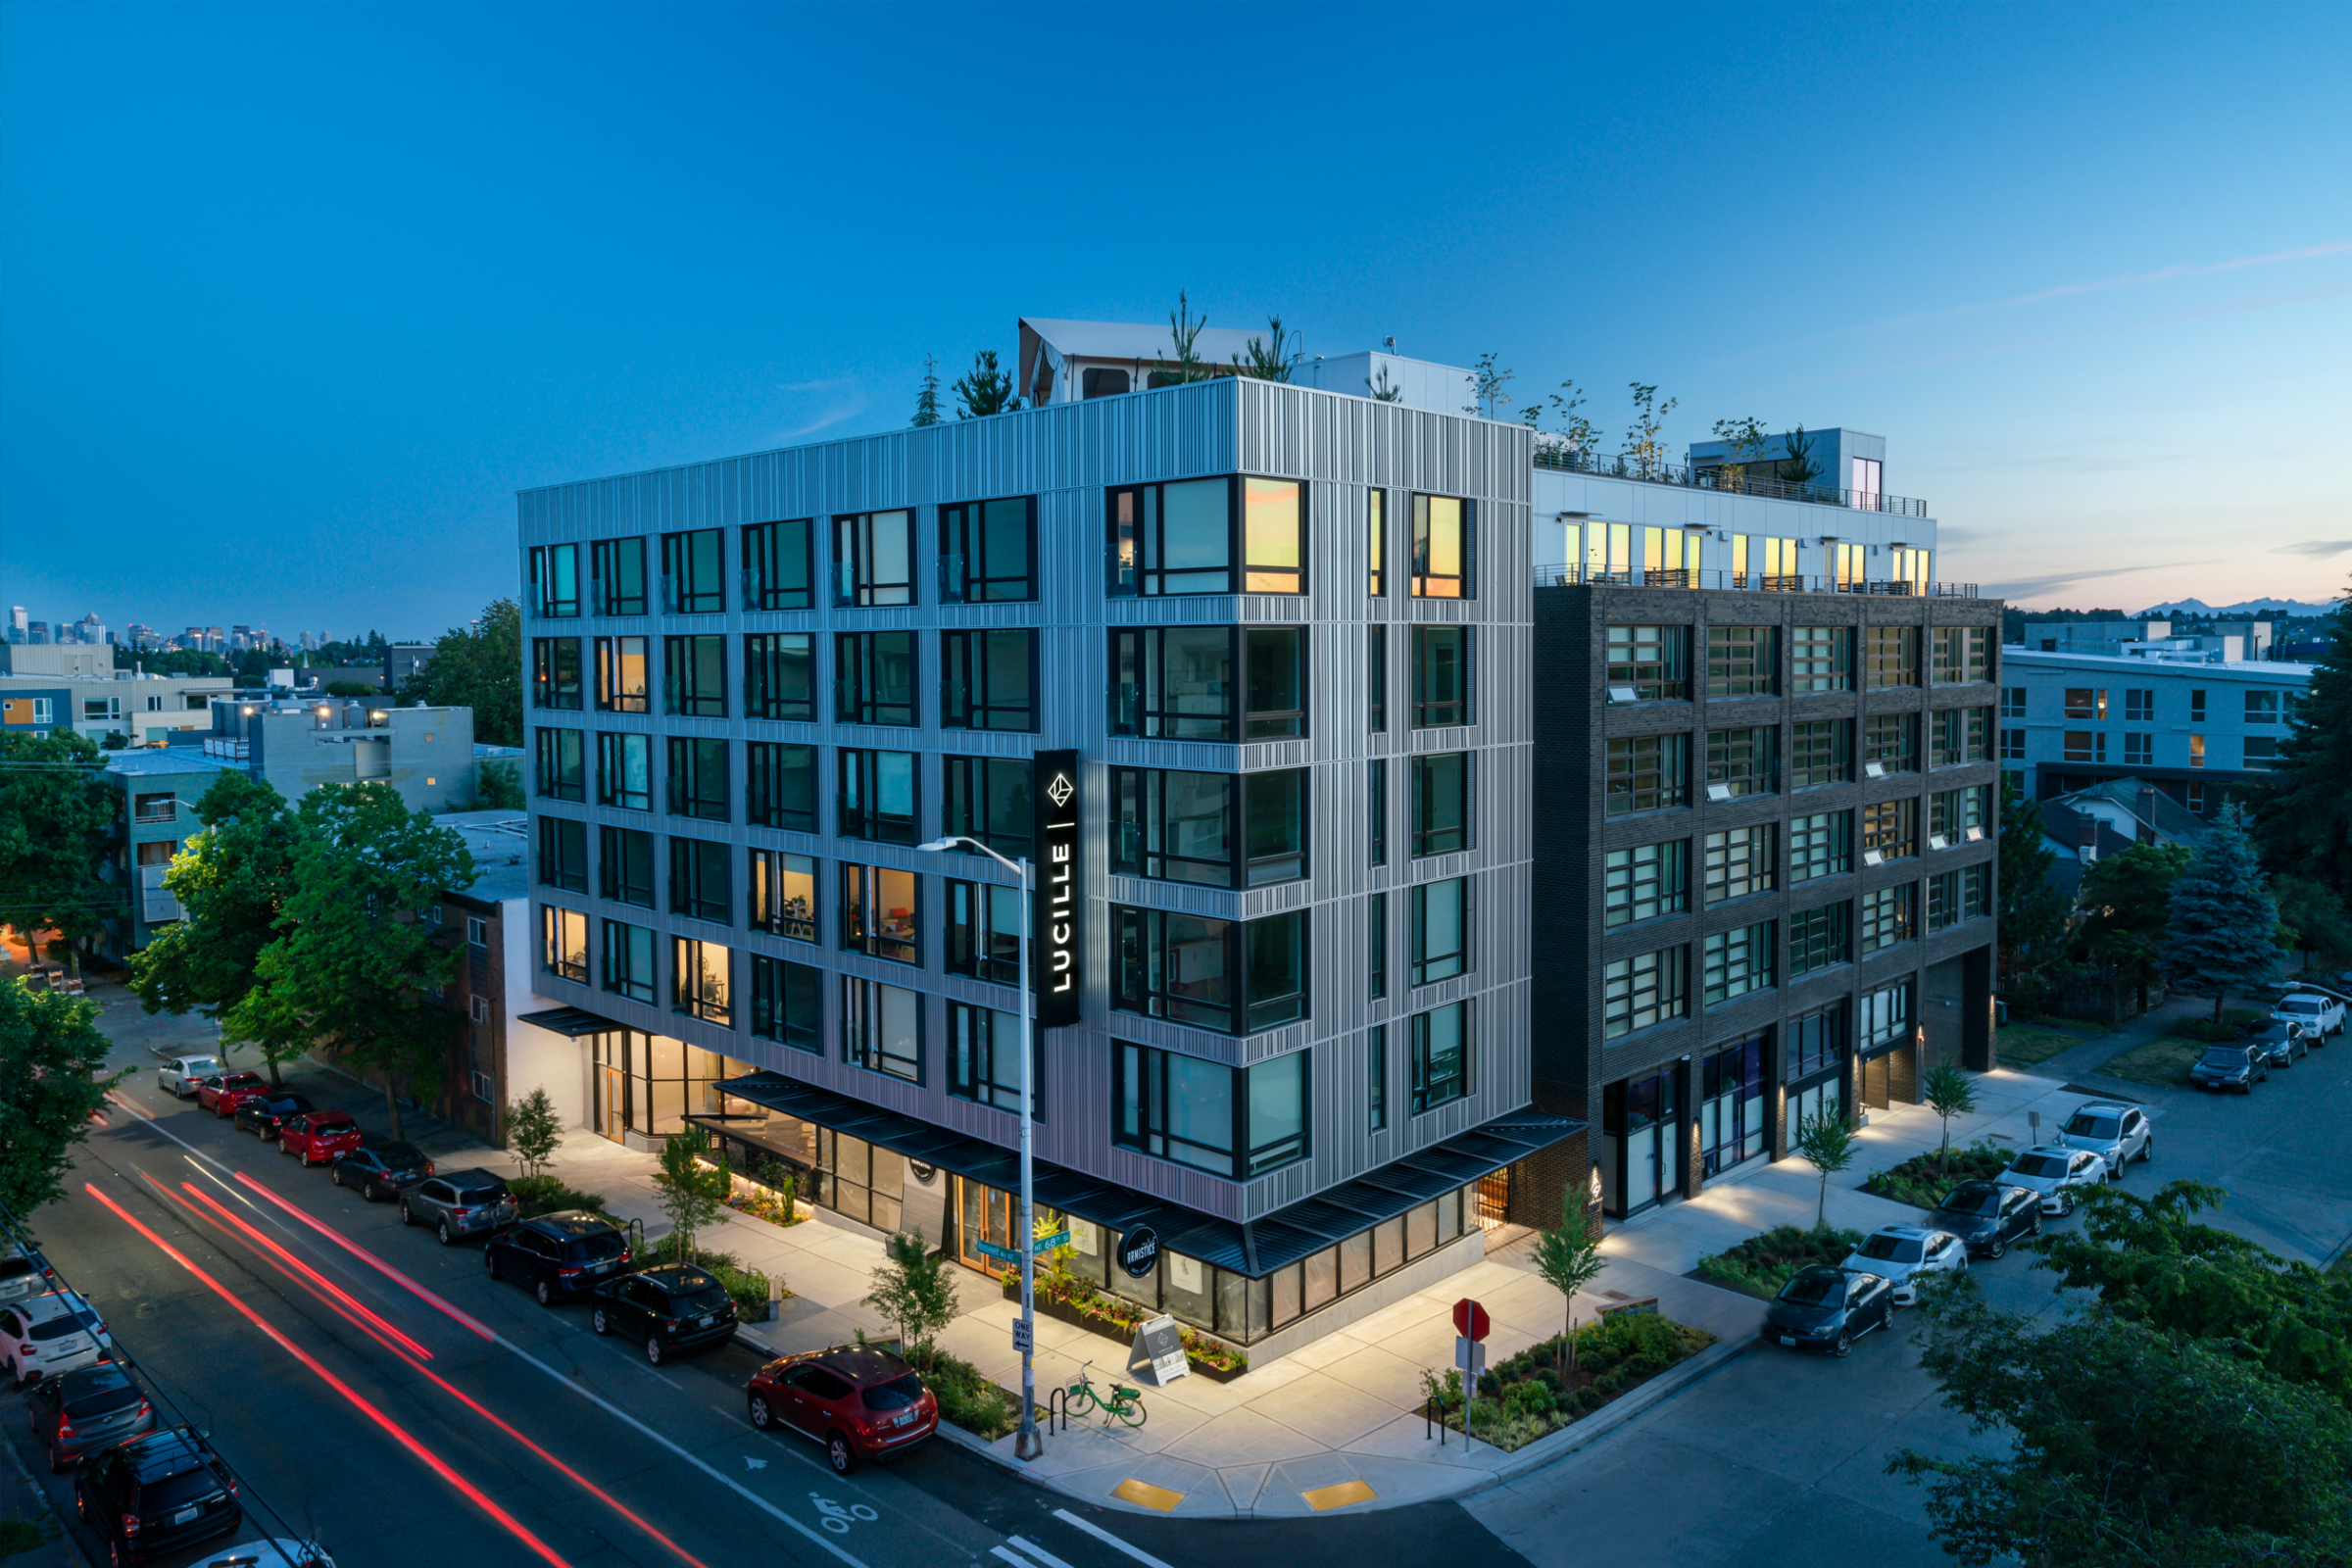 Lucille on Roosevelt: A boutique, mixed-use, multifamily project by Seattle architecture firm, Board & Vellum.